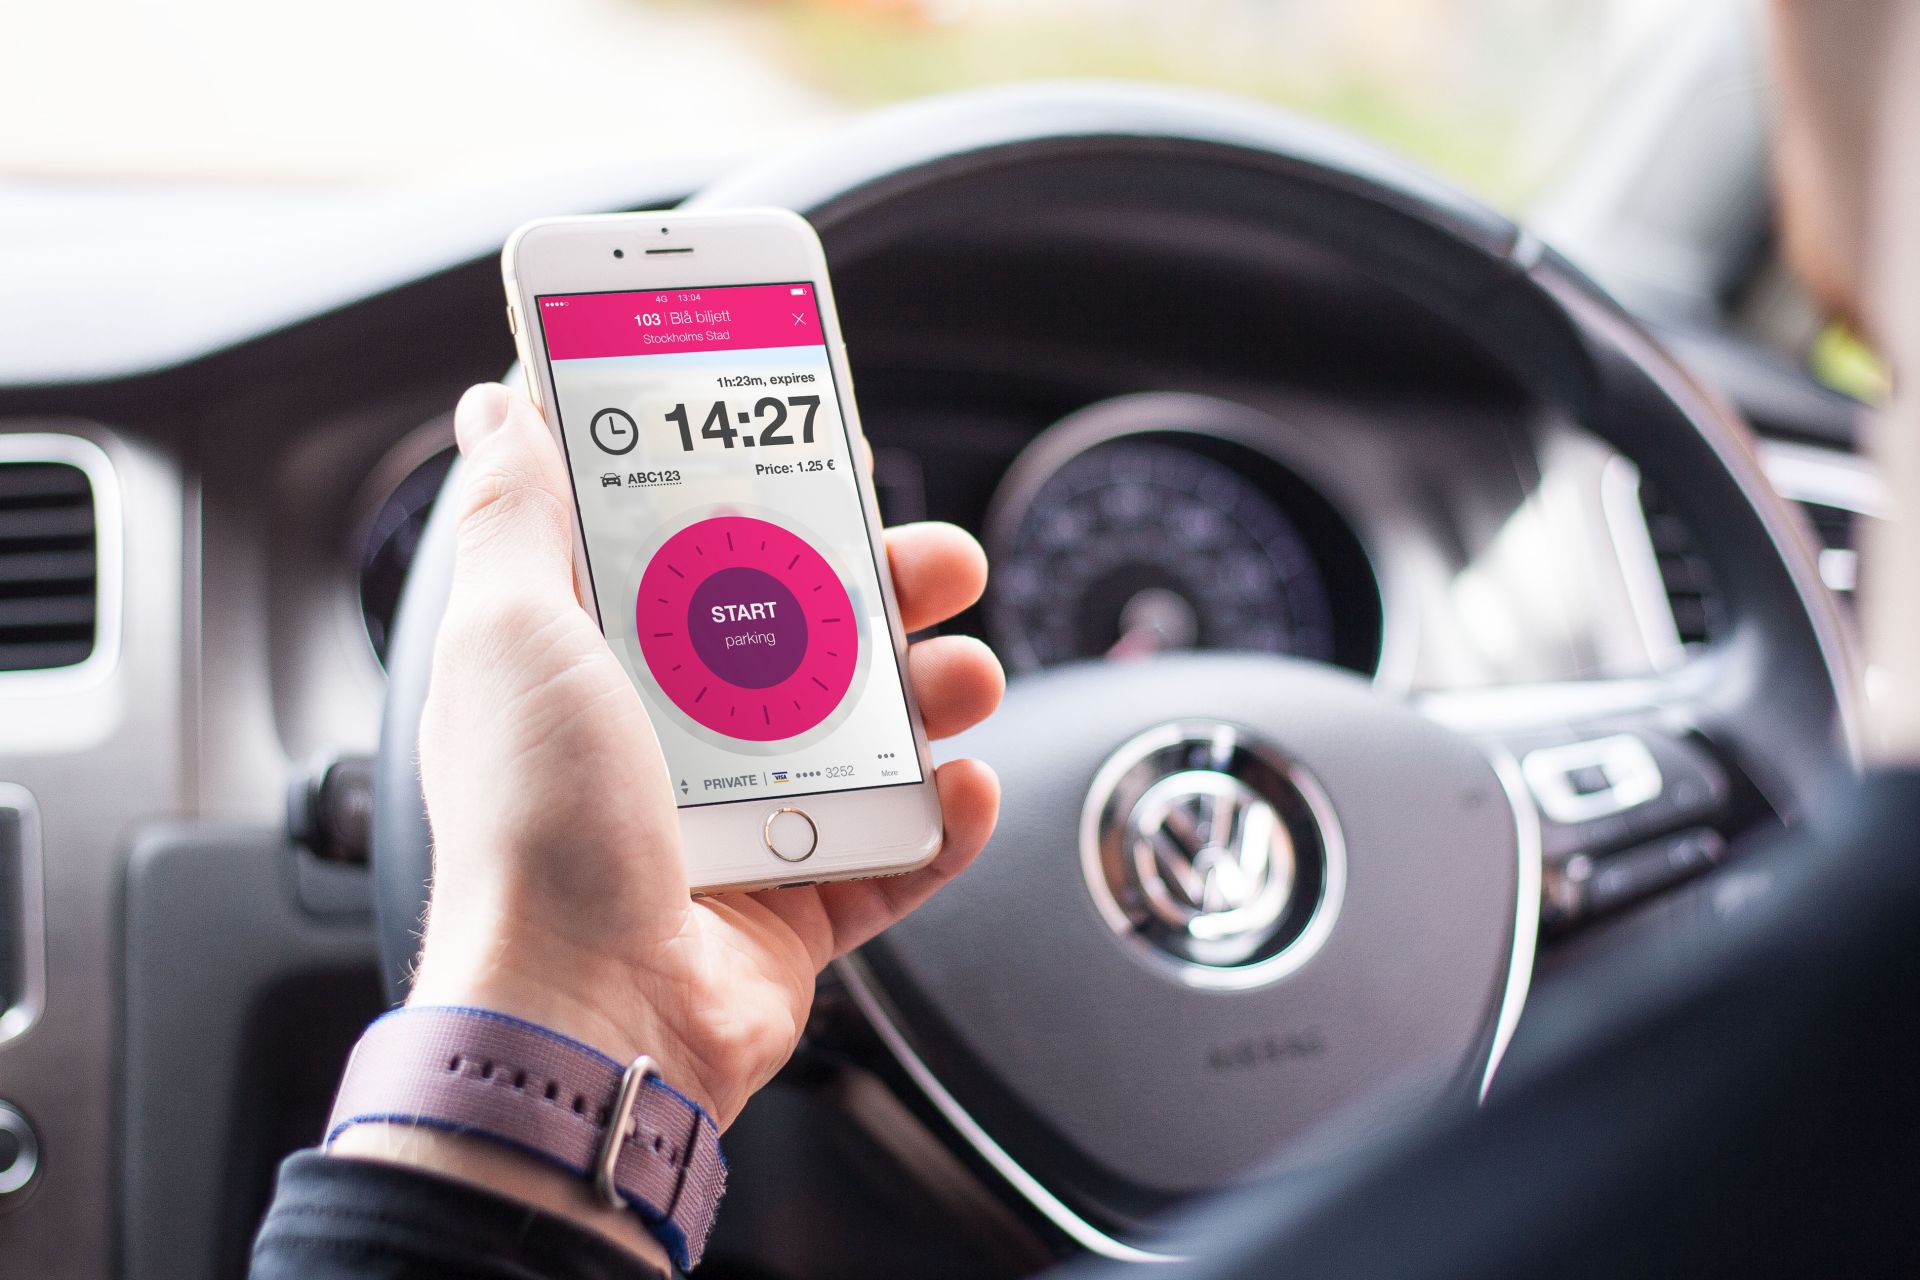 The EasyPark app enables you to quickly and easily find a parking space in over 1,000 cities, in 15 countries.